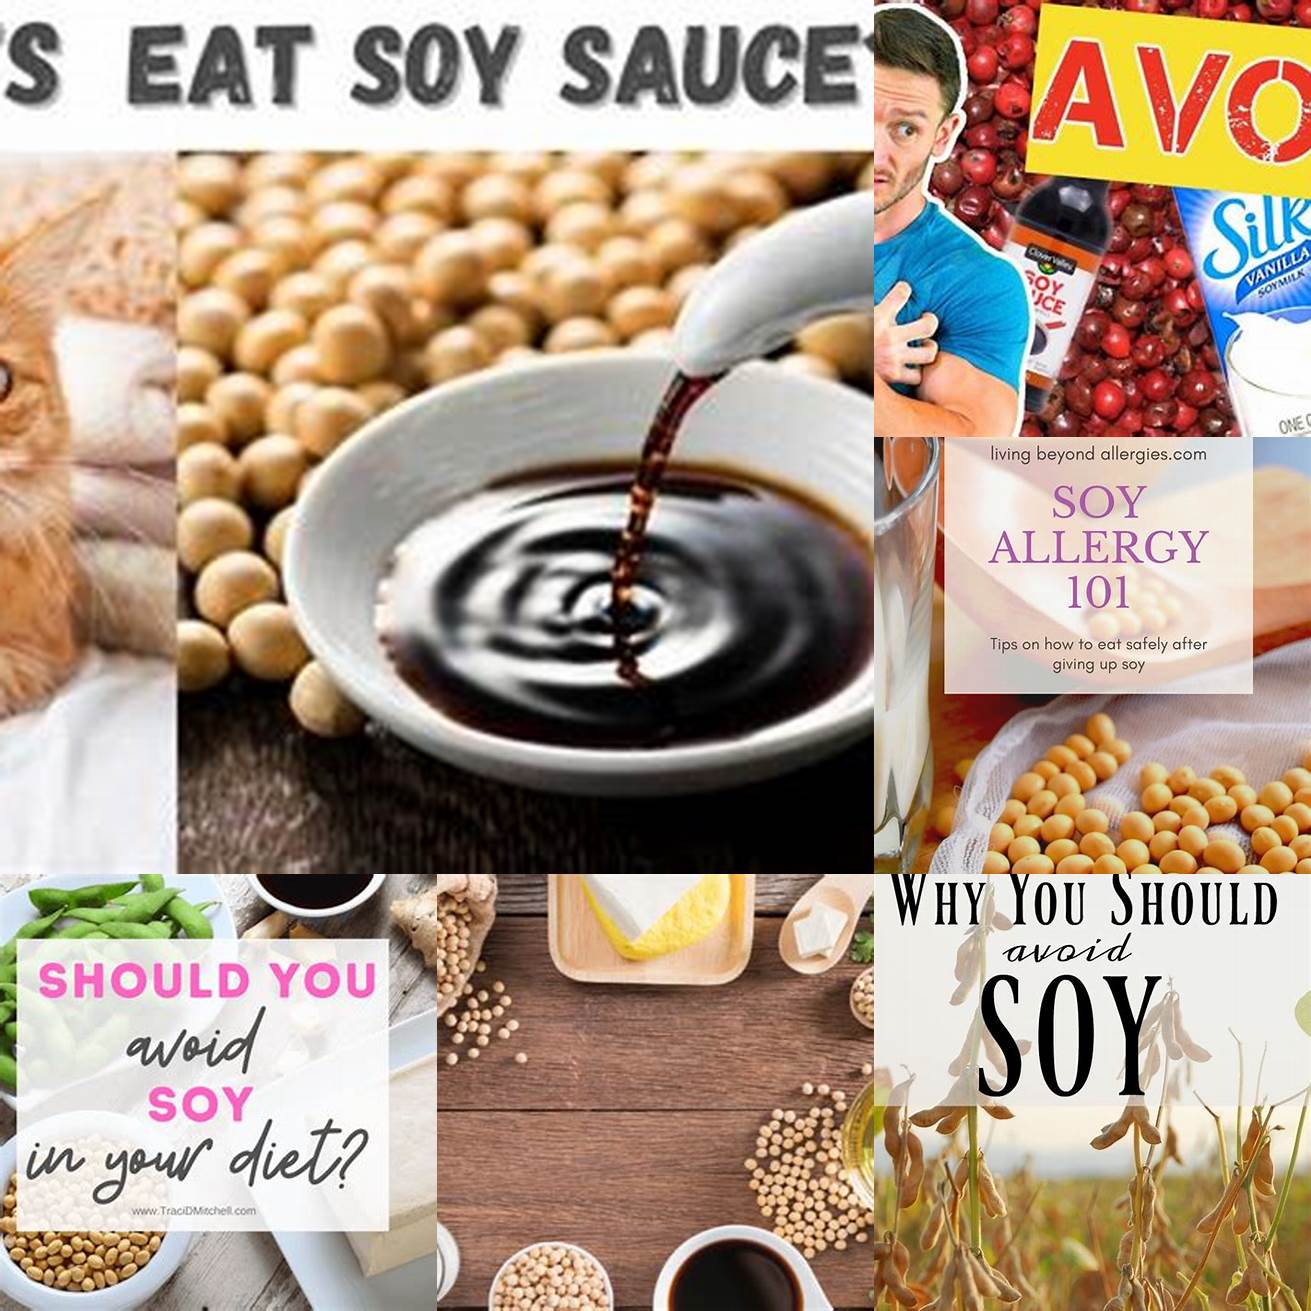 Avoid soy products